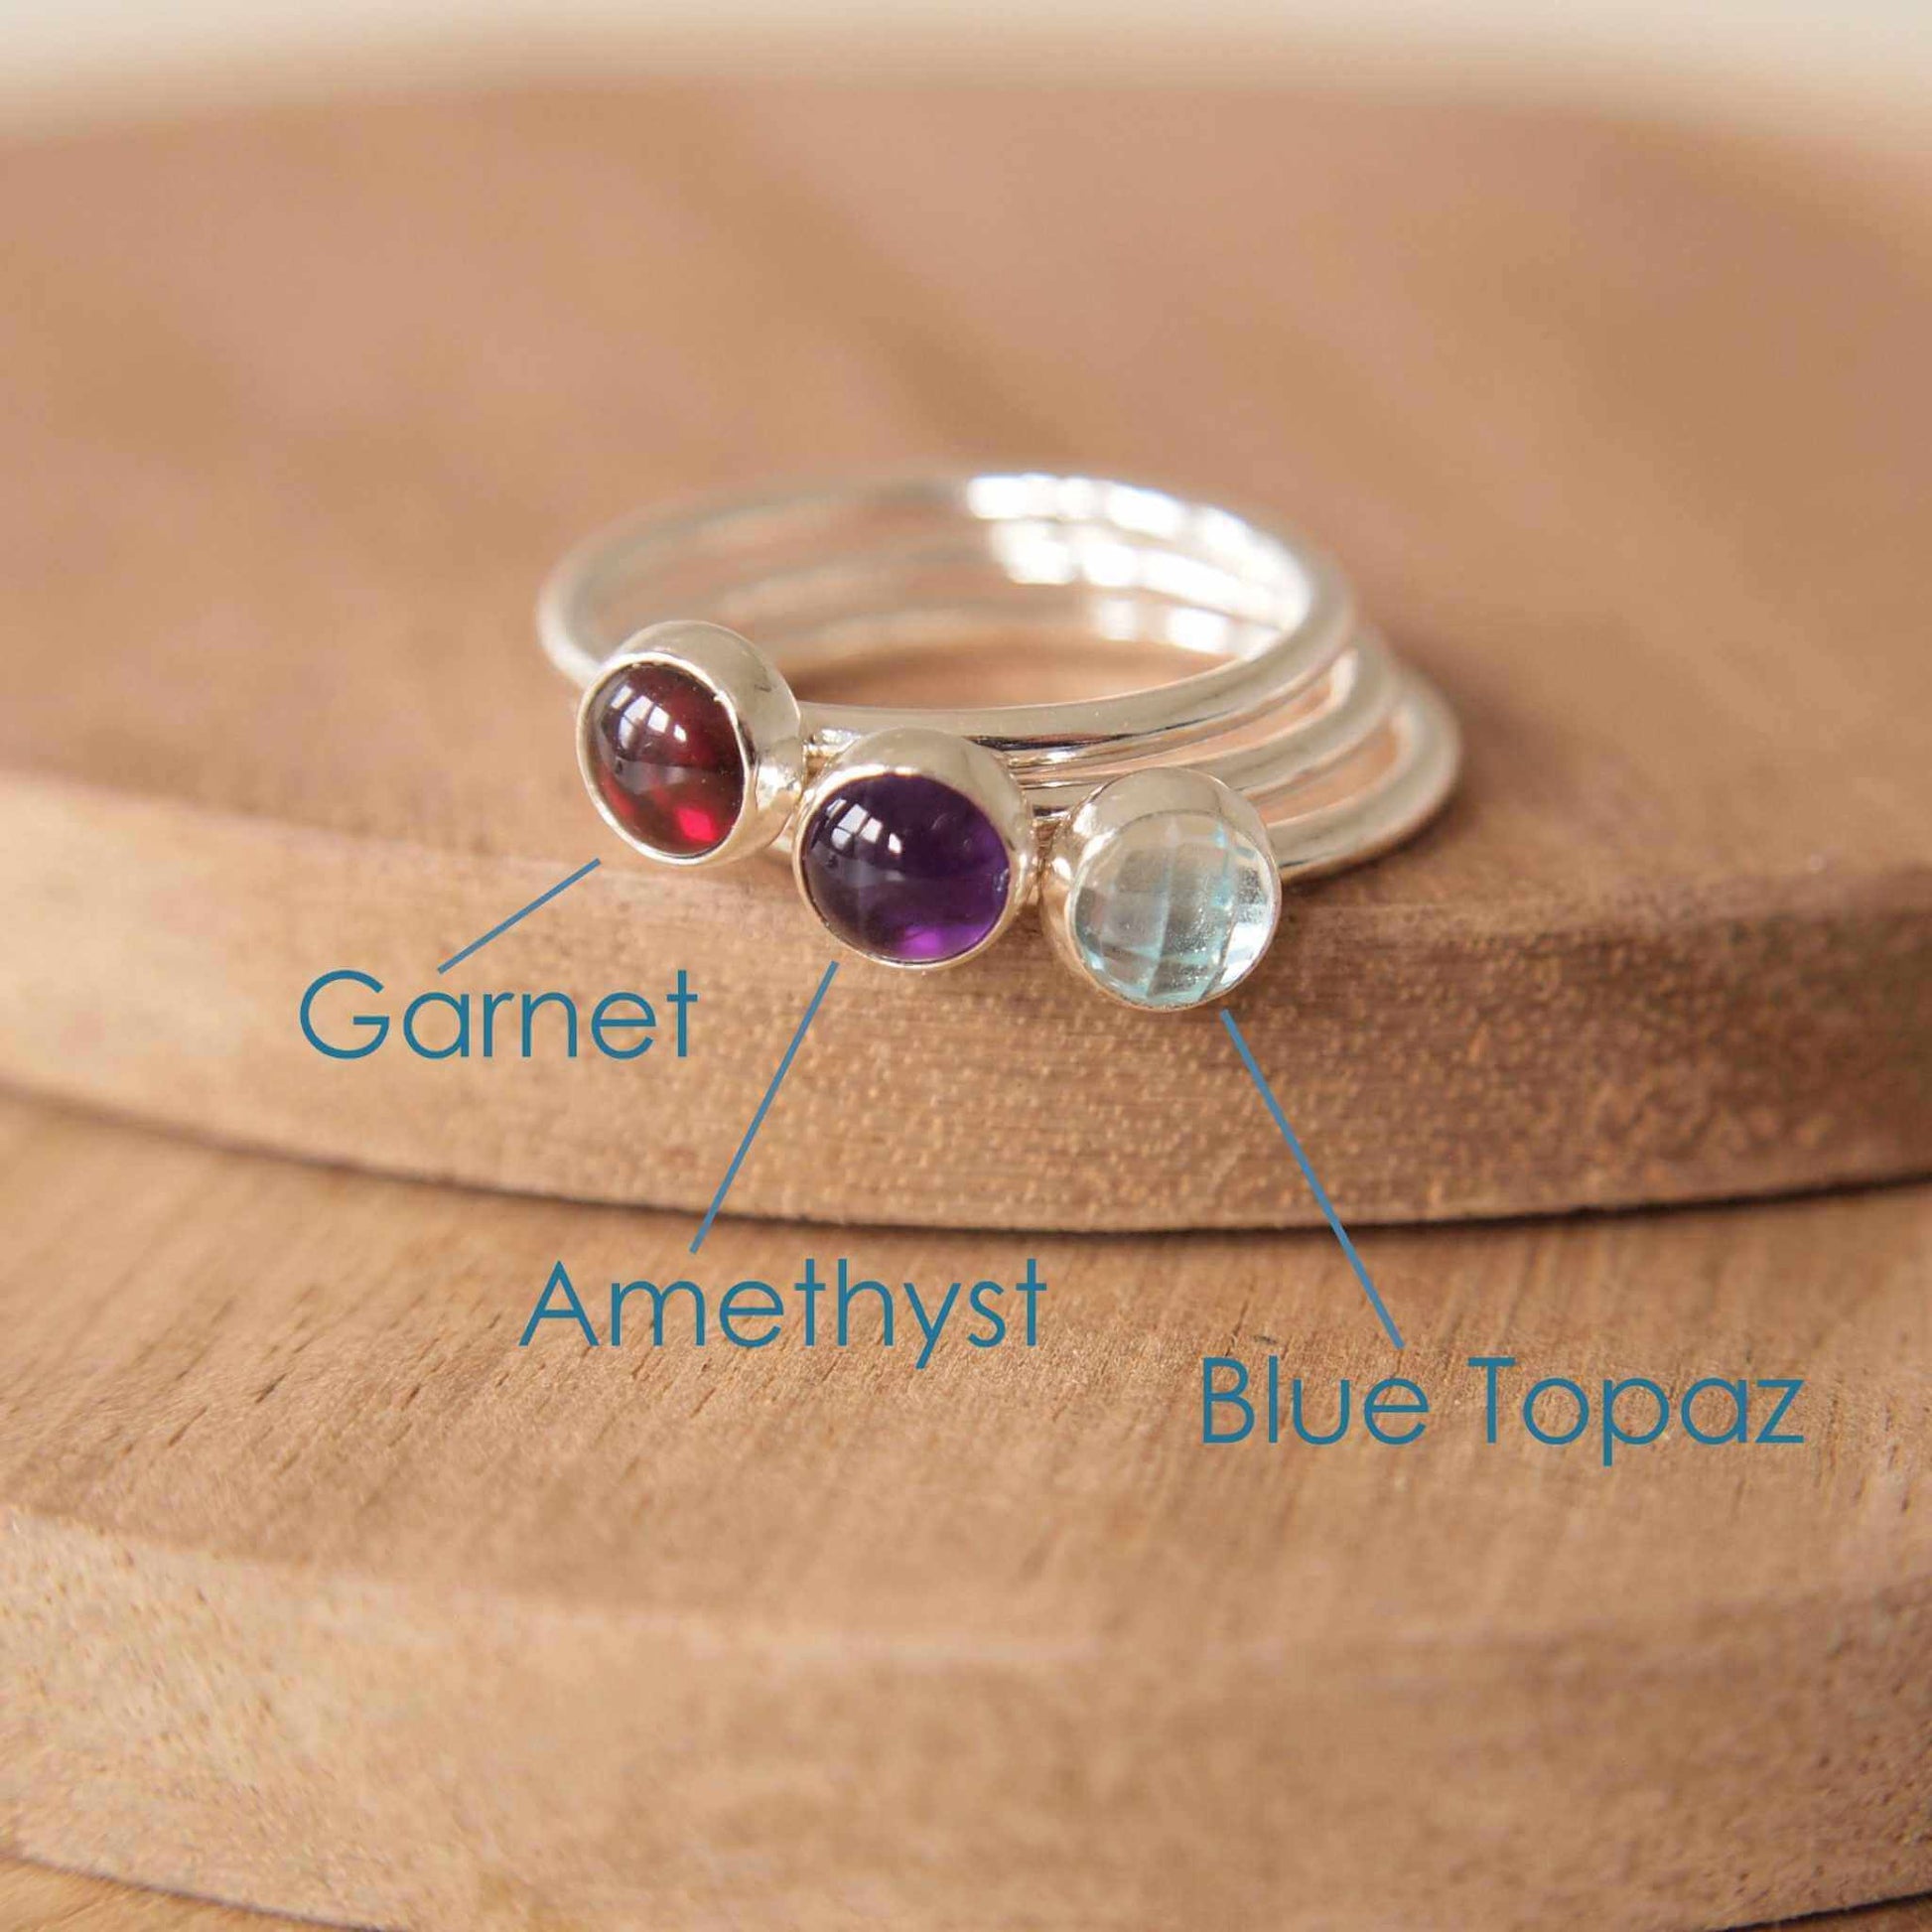 Three Silver rings, each set simply with a single gemstone in Garnet, Amethyst and Blue Topaz in a round 5mm size. Birthstones for January, February and March. Handmade by Maram Jewellery in Edinburgh